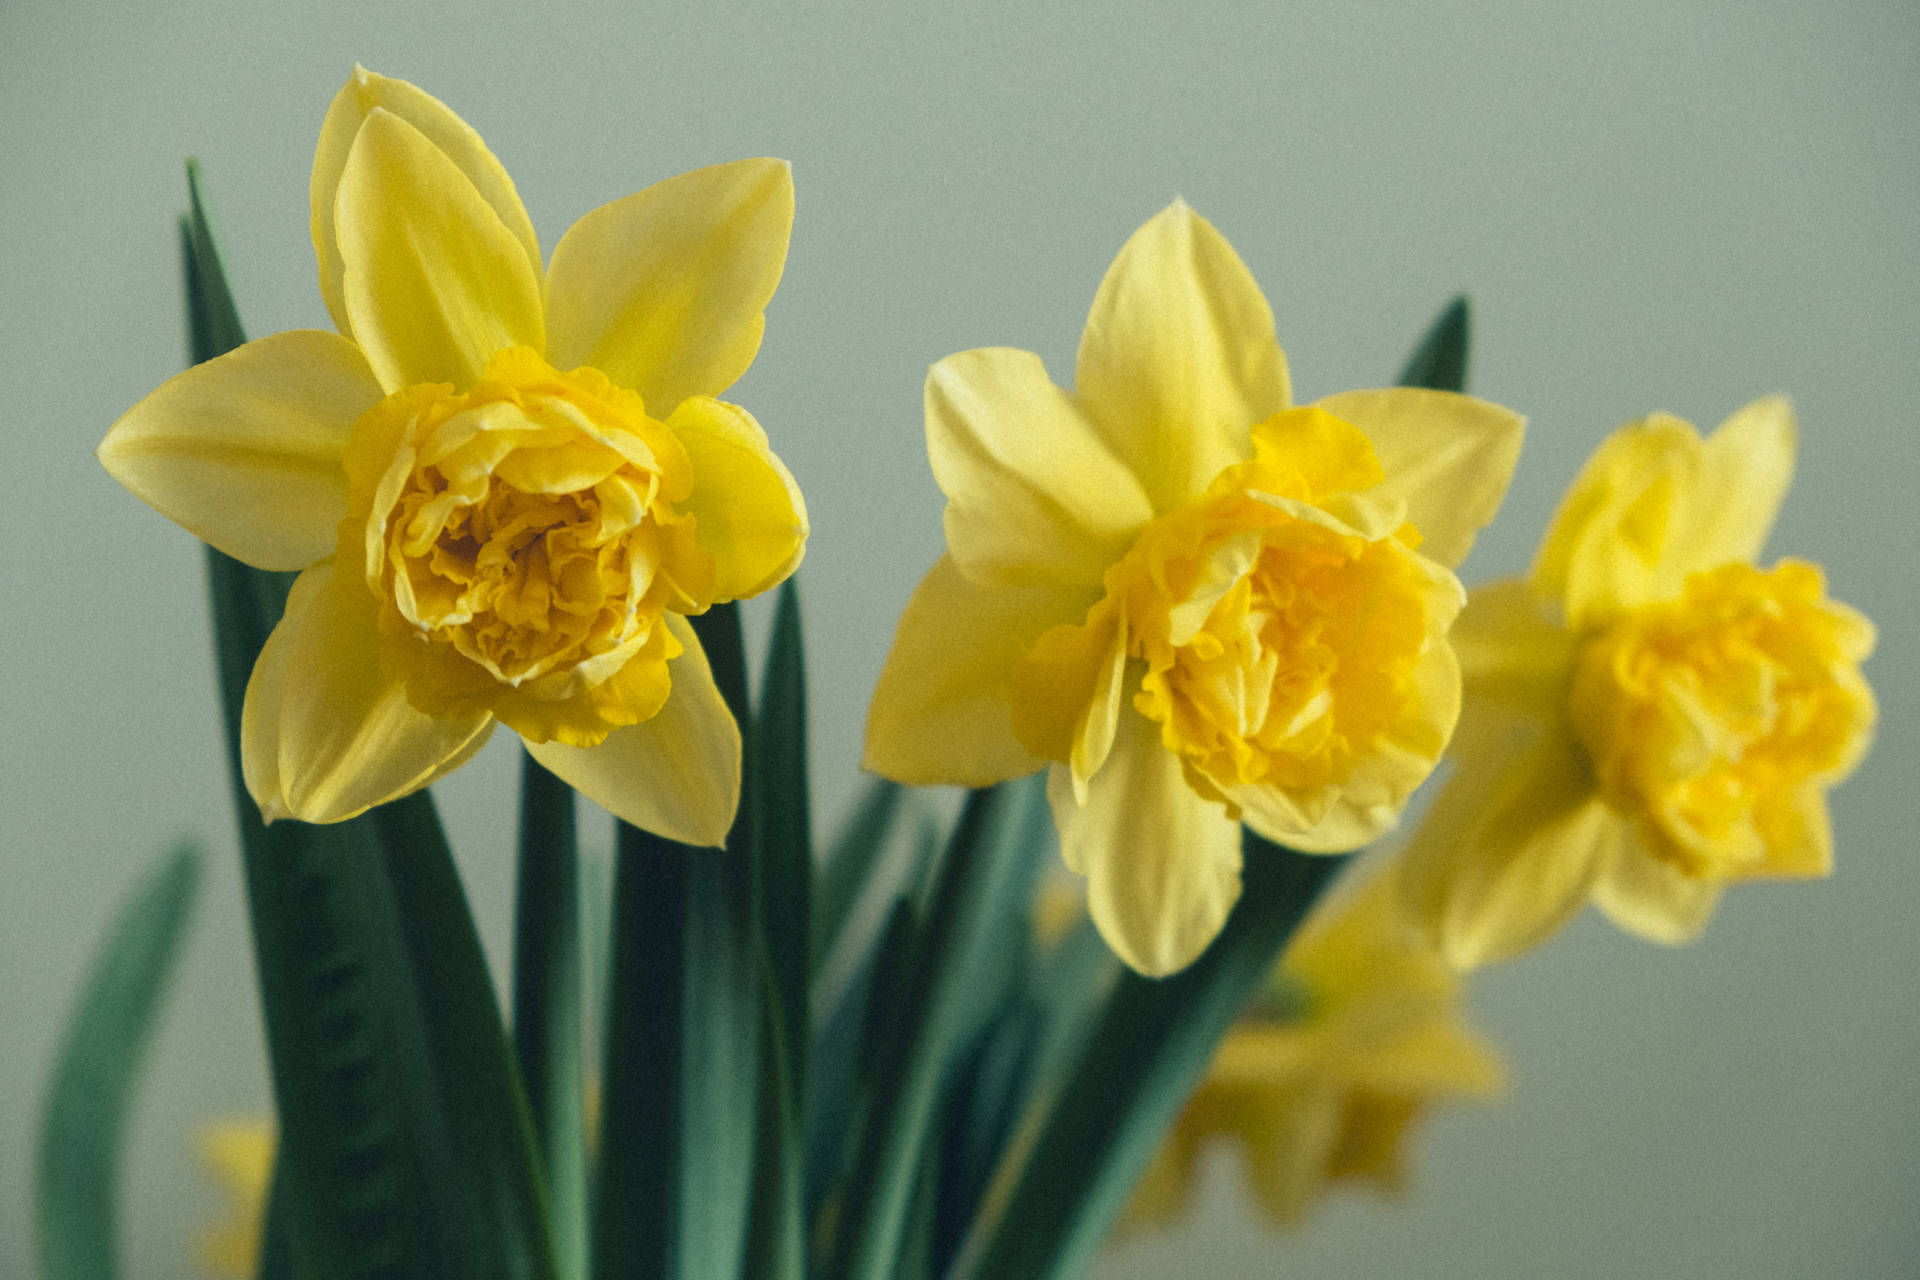 Daffodil 6240X4160 Wallpaper and Background Image